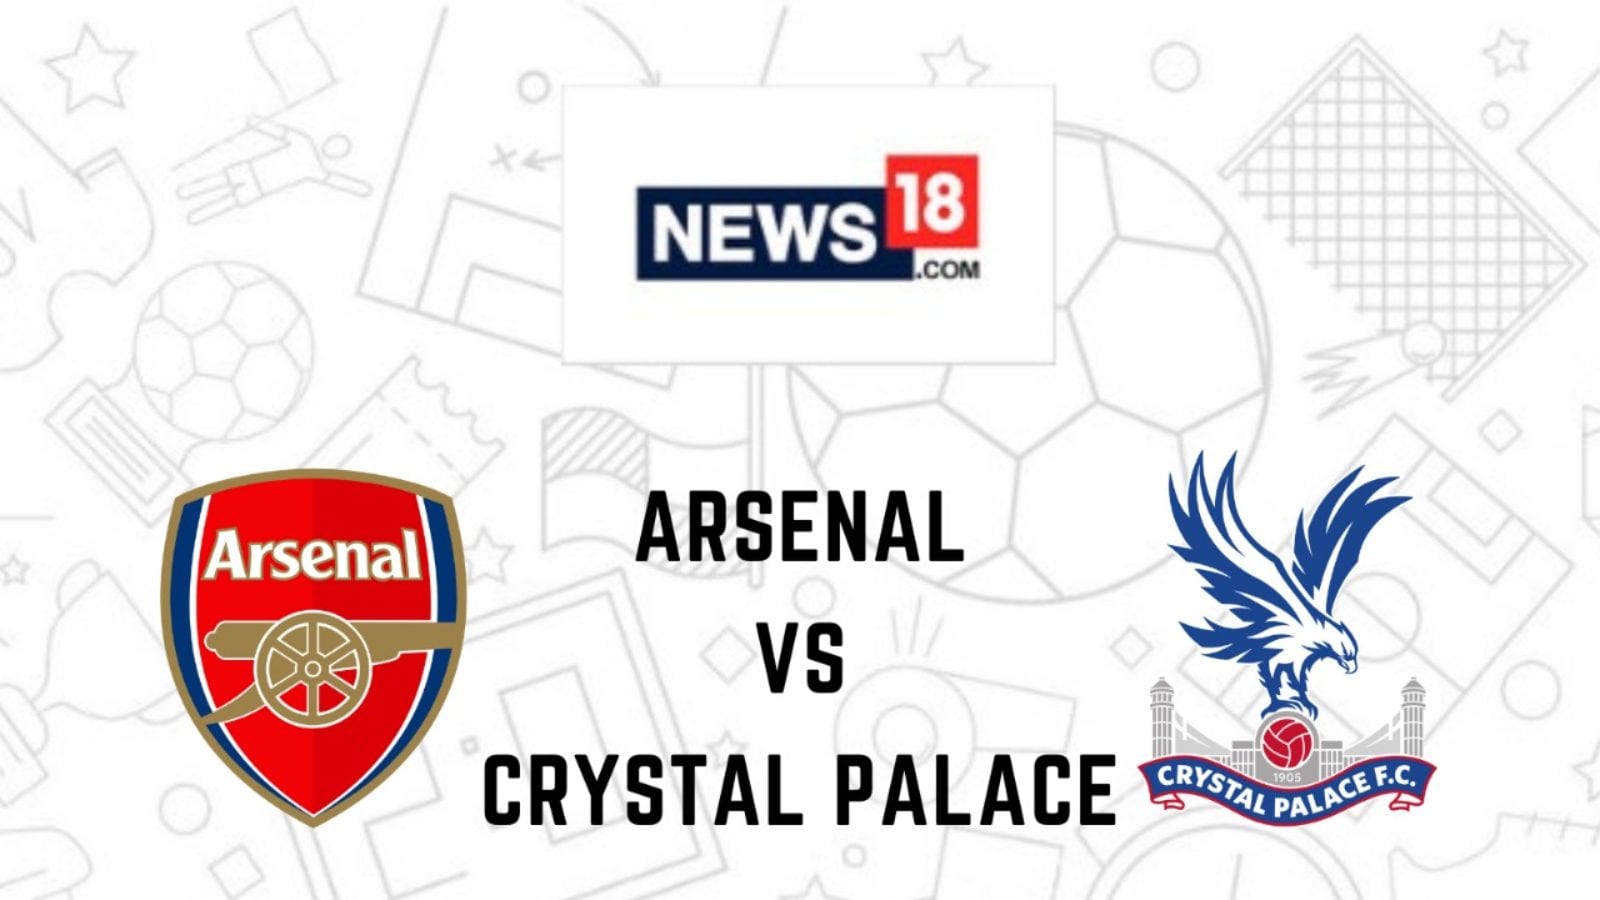 ARS vs CRY Dream11 Team Prediction And Tips Premier League 2021-22: Check Captain, Vice-Captain And Probable Playing XIs For Today’s Arsenal vs Crystal Palace, Wolverhampton, October 19 12:30 PM IST, Emirates Stadium, London